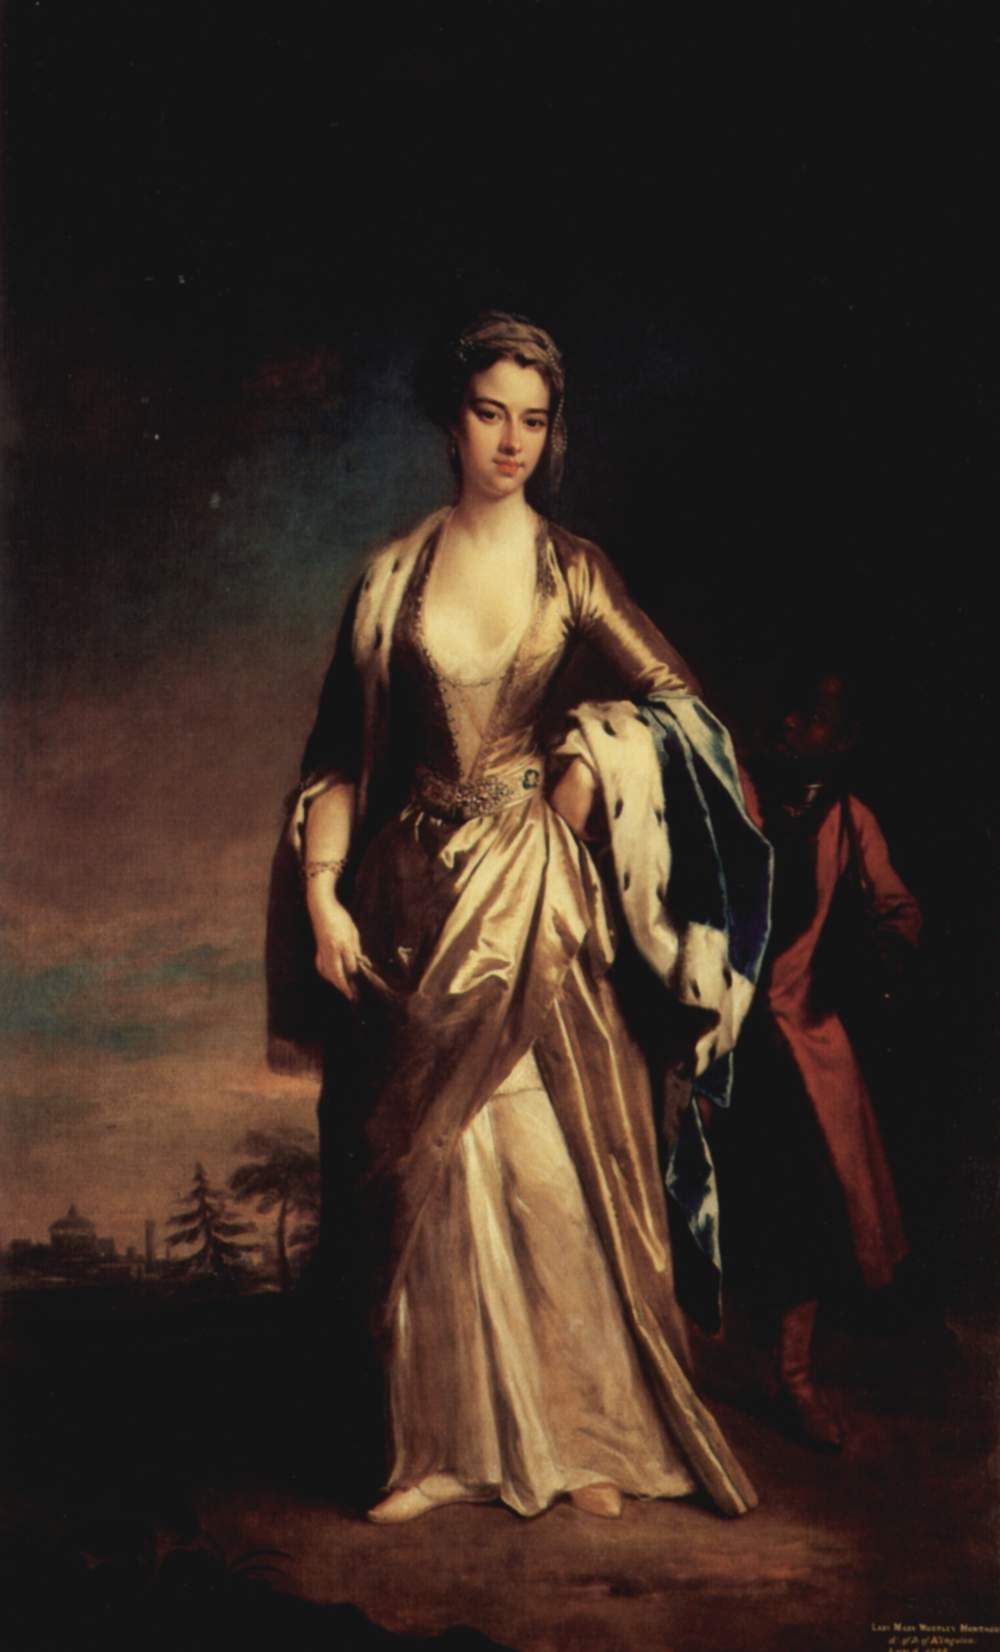 An oil painting of Lady Mary Wortley Montagu by Jonathon Richardson.